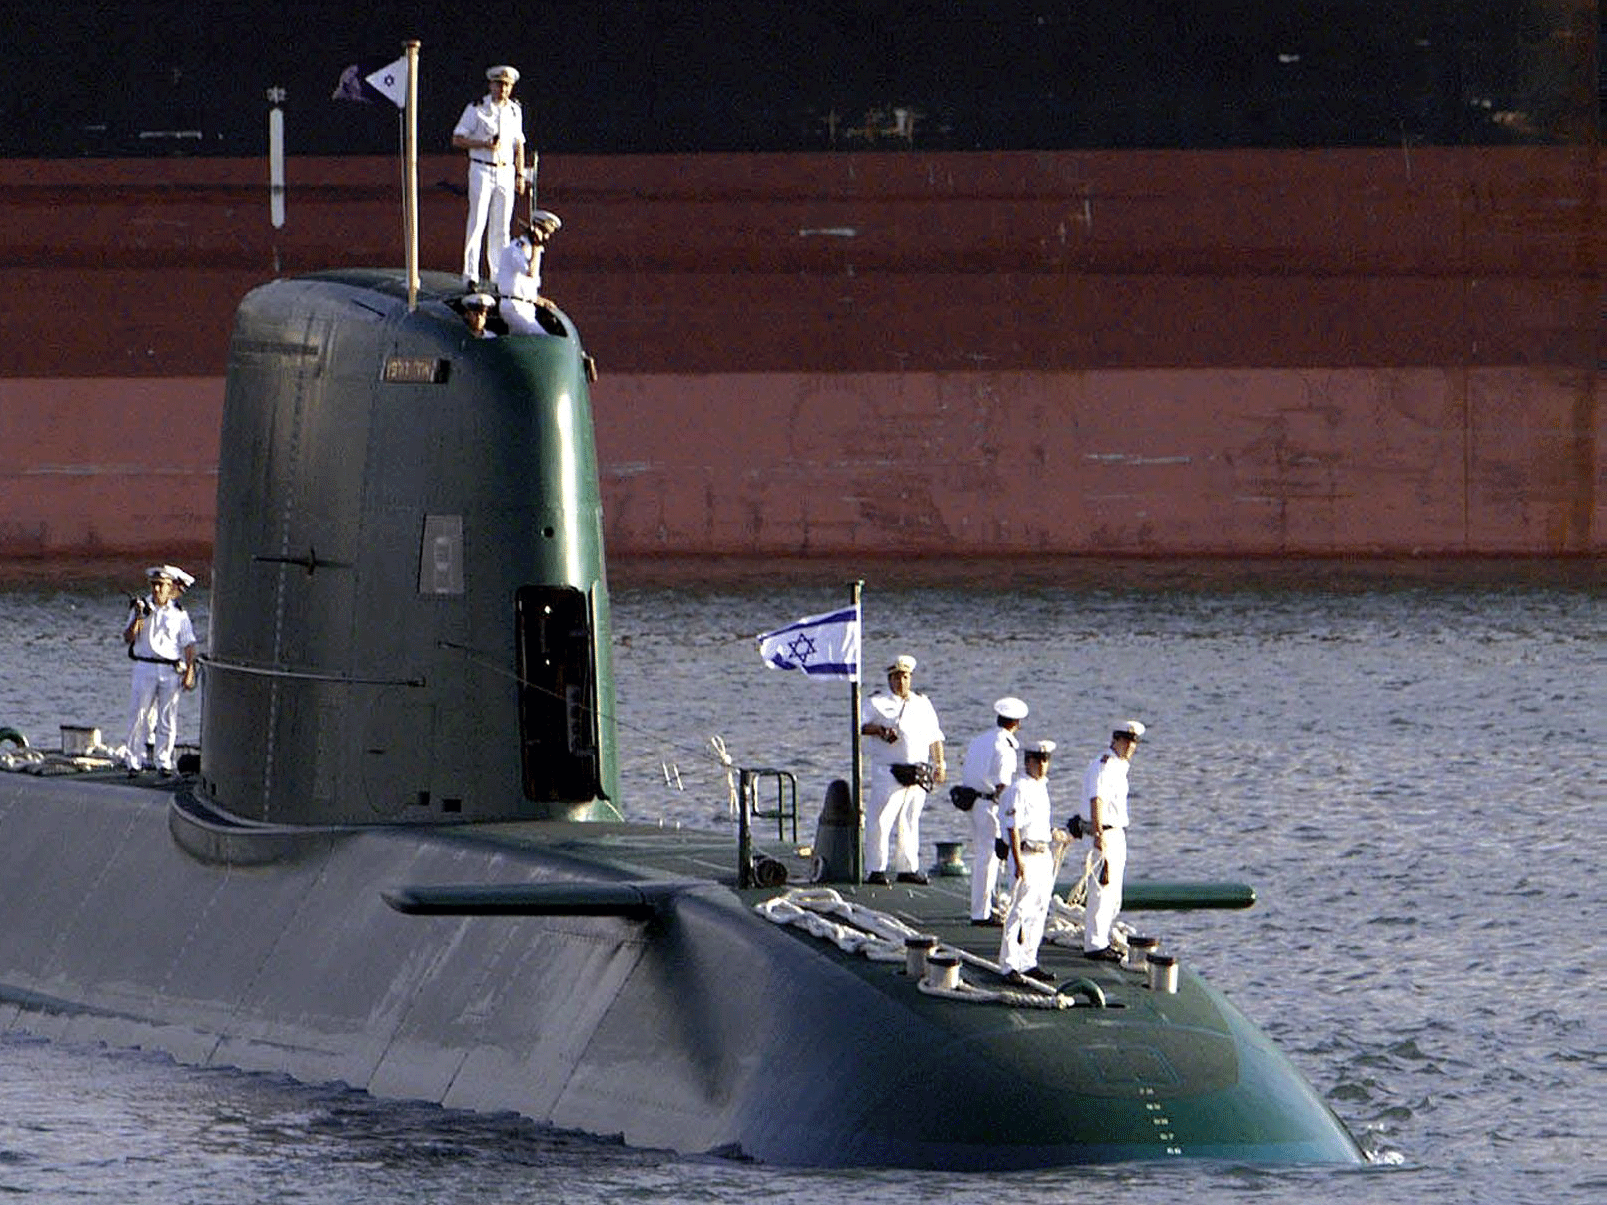 An Israeli Dolphin-class submarine. It is widely believed that these submarines carry nuclear missiles.